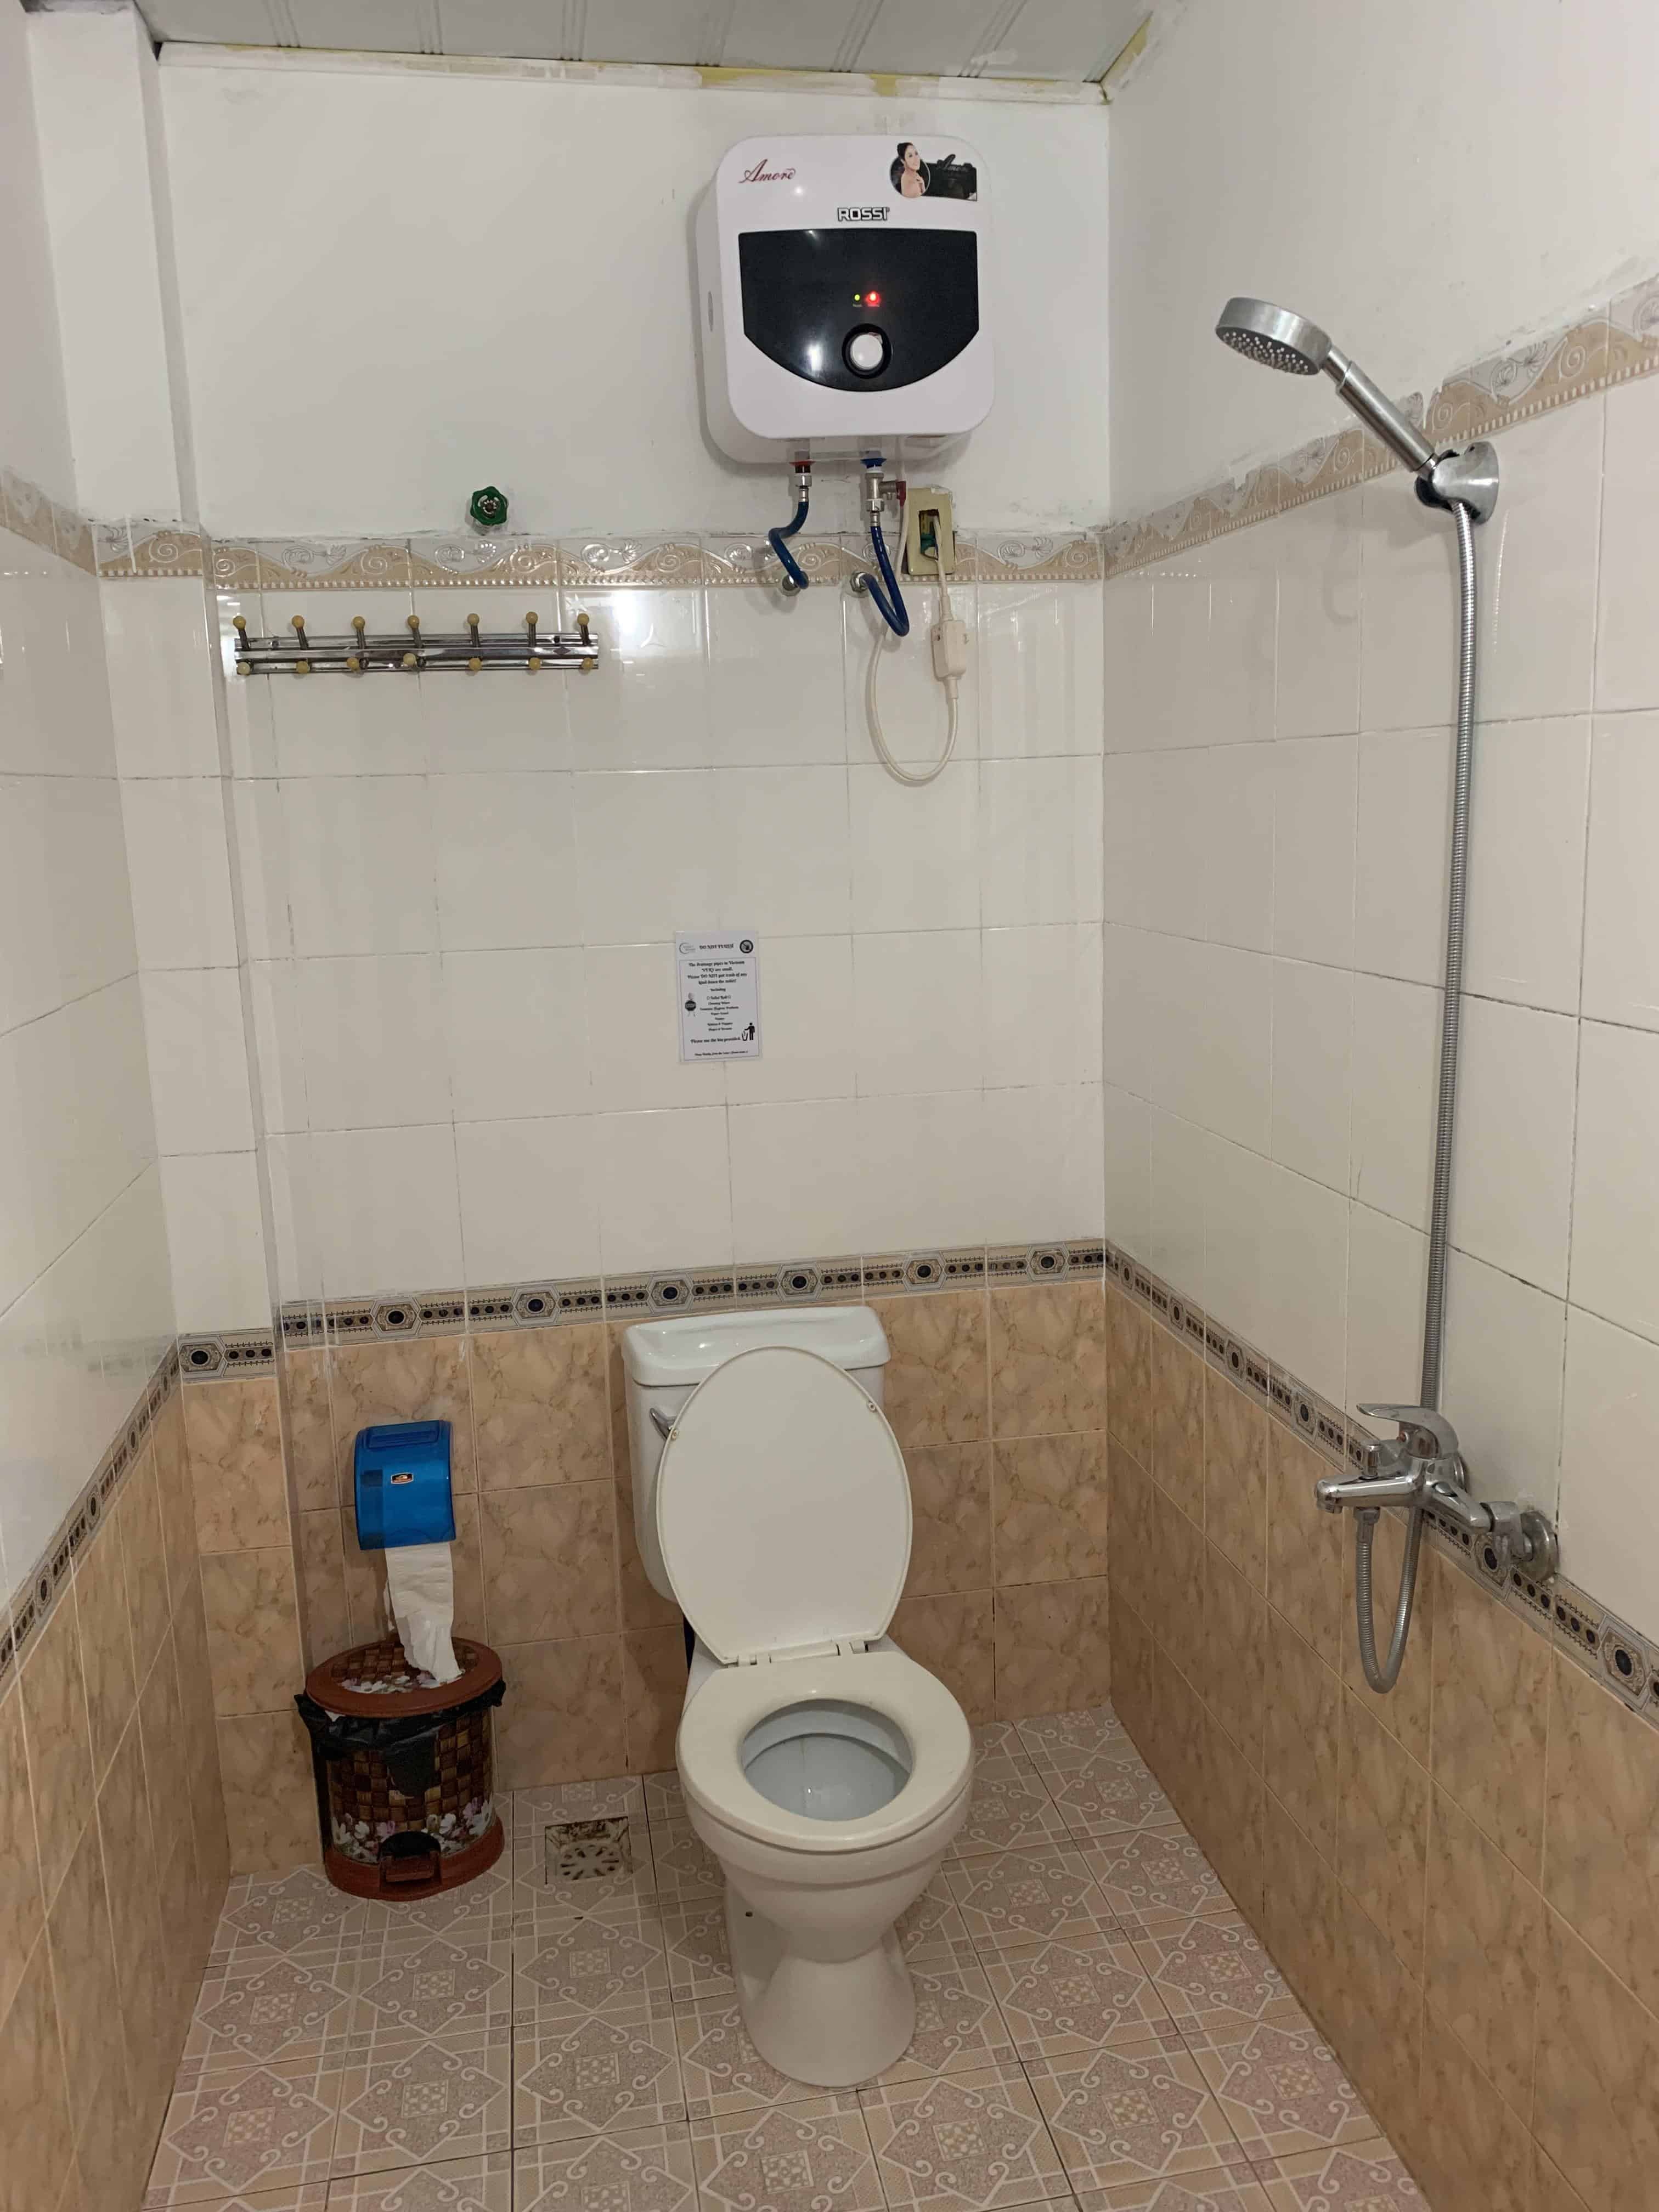 No divider between shower and toilet